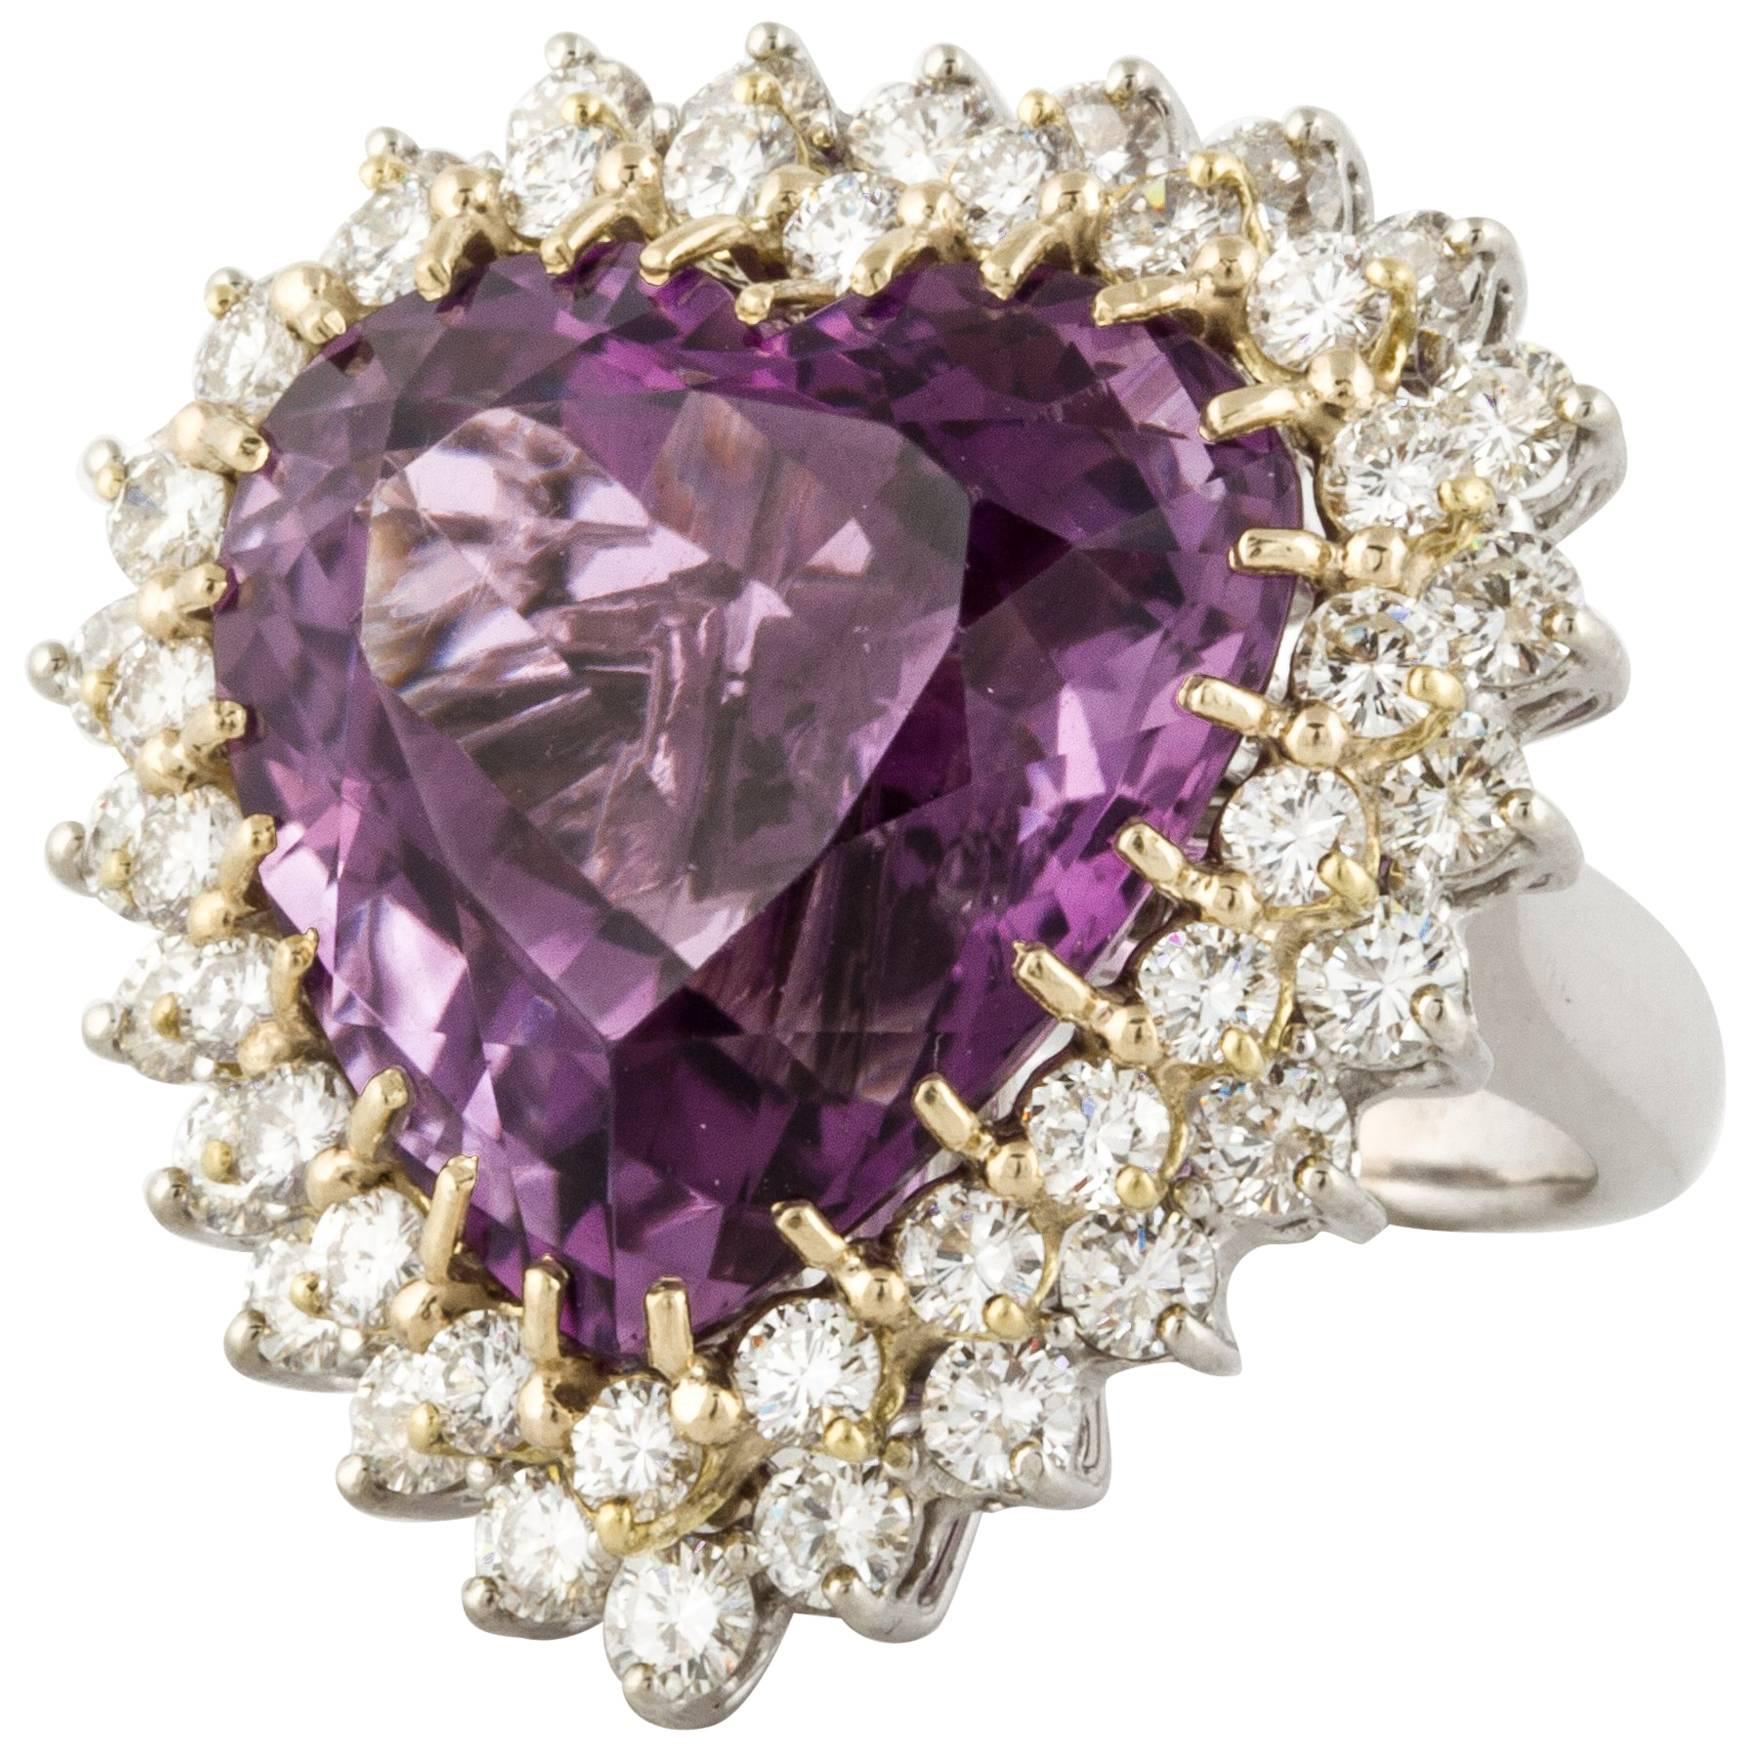 27 Carat Heart-Shaped Amethyst and Diamond Ring/Pendant in 18K Gold